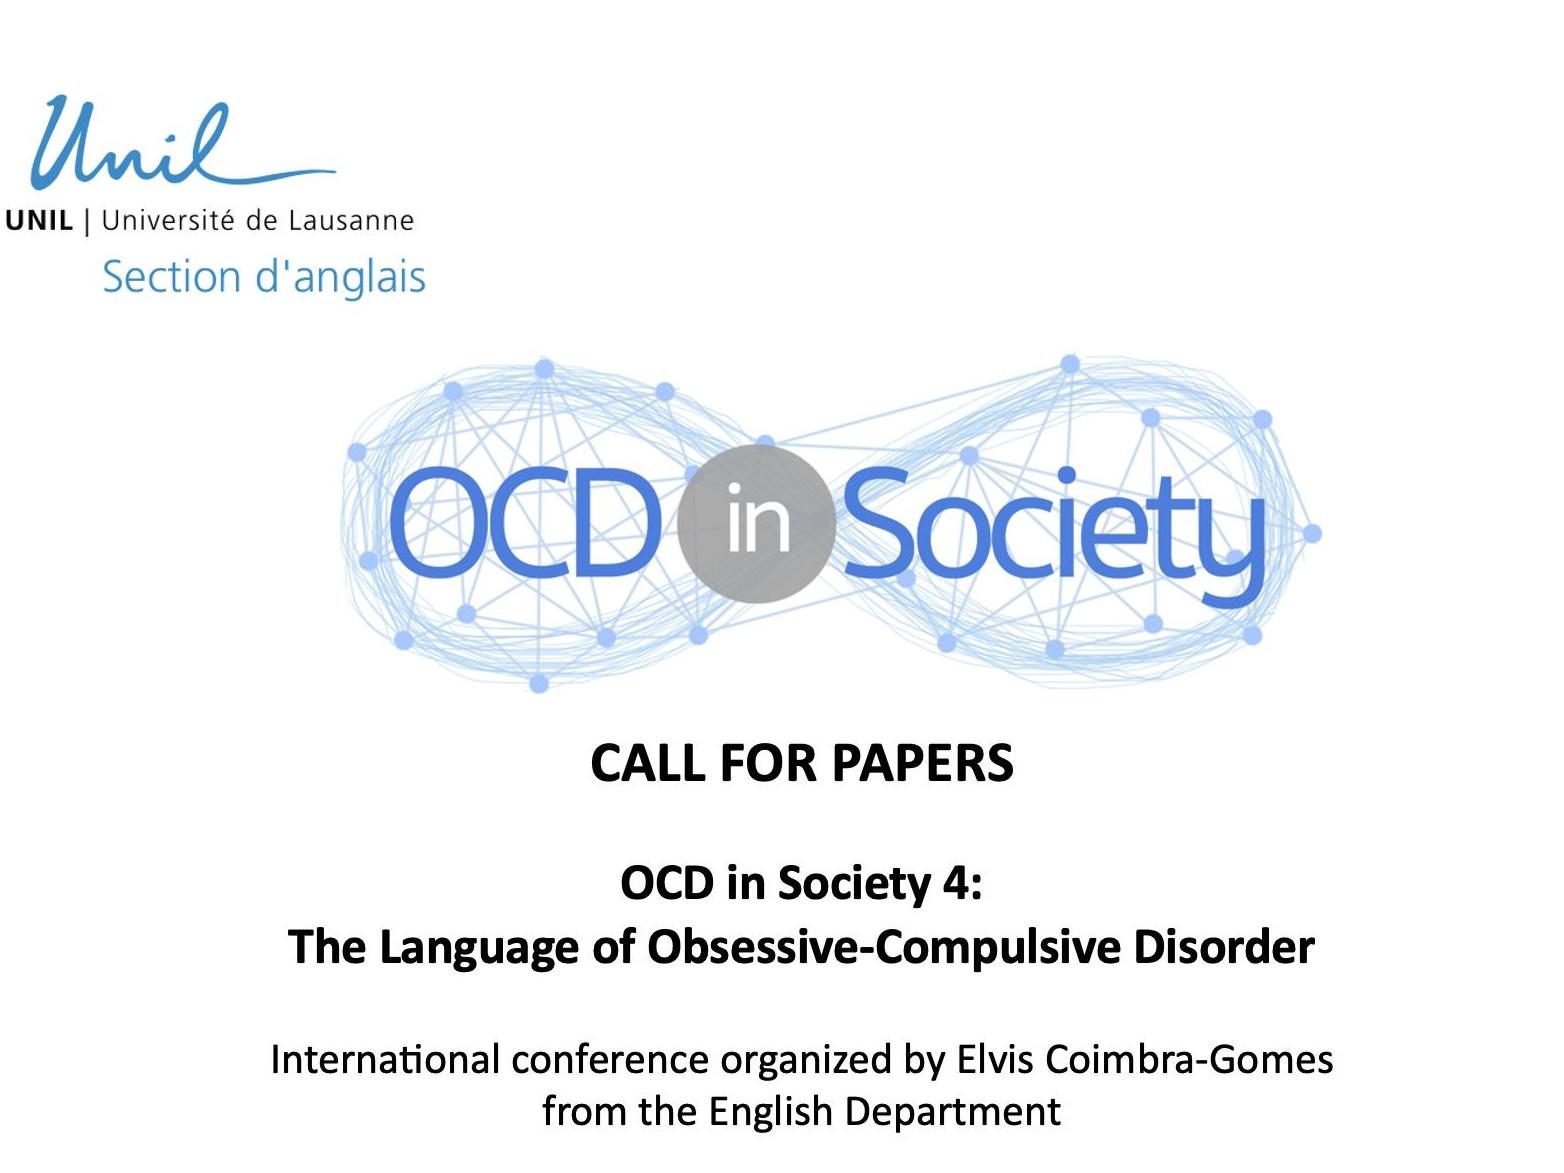 Call for papers: OCD in Society 4 